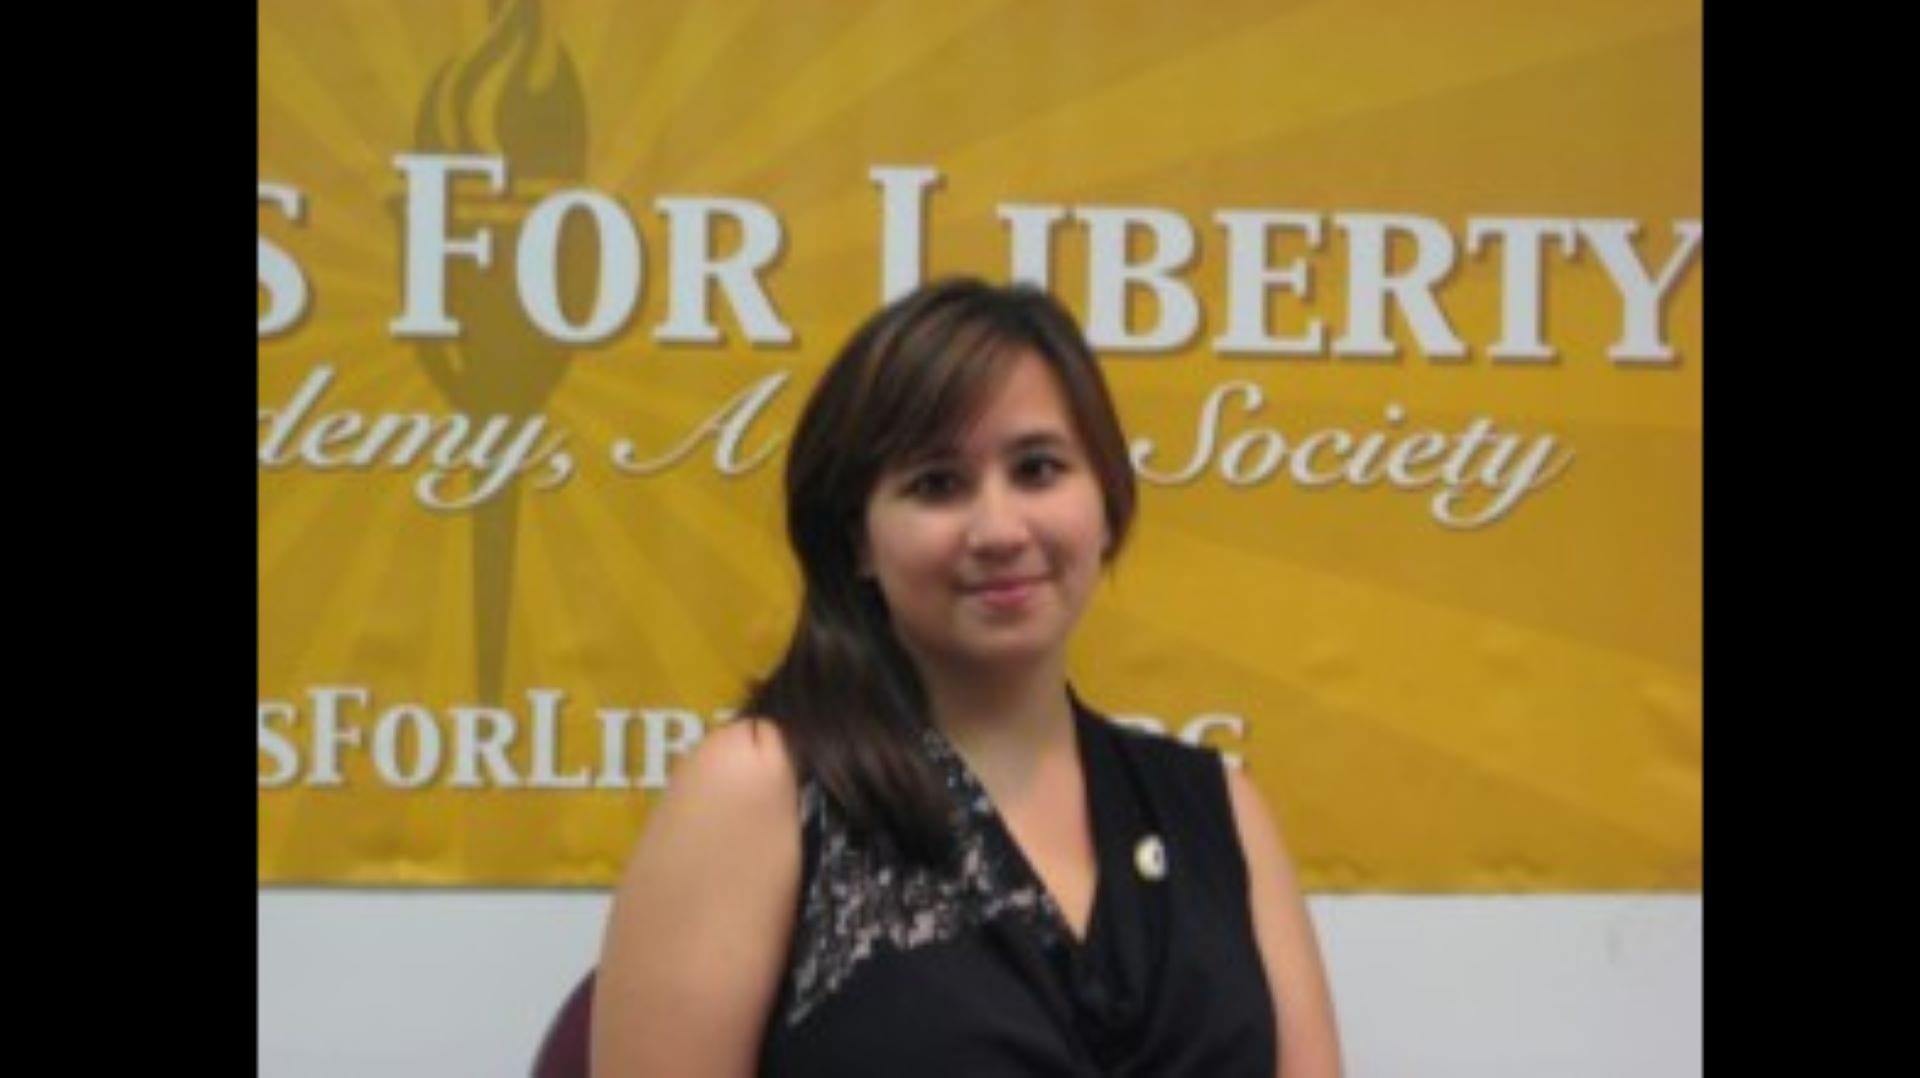 Christine-Marie Dixon shares her experience of how Students For Liberty's Campus Coordinator Program changed her life